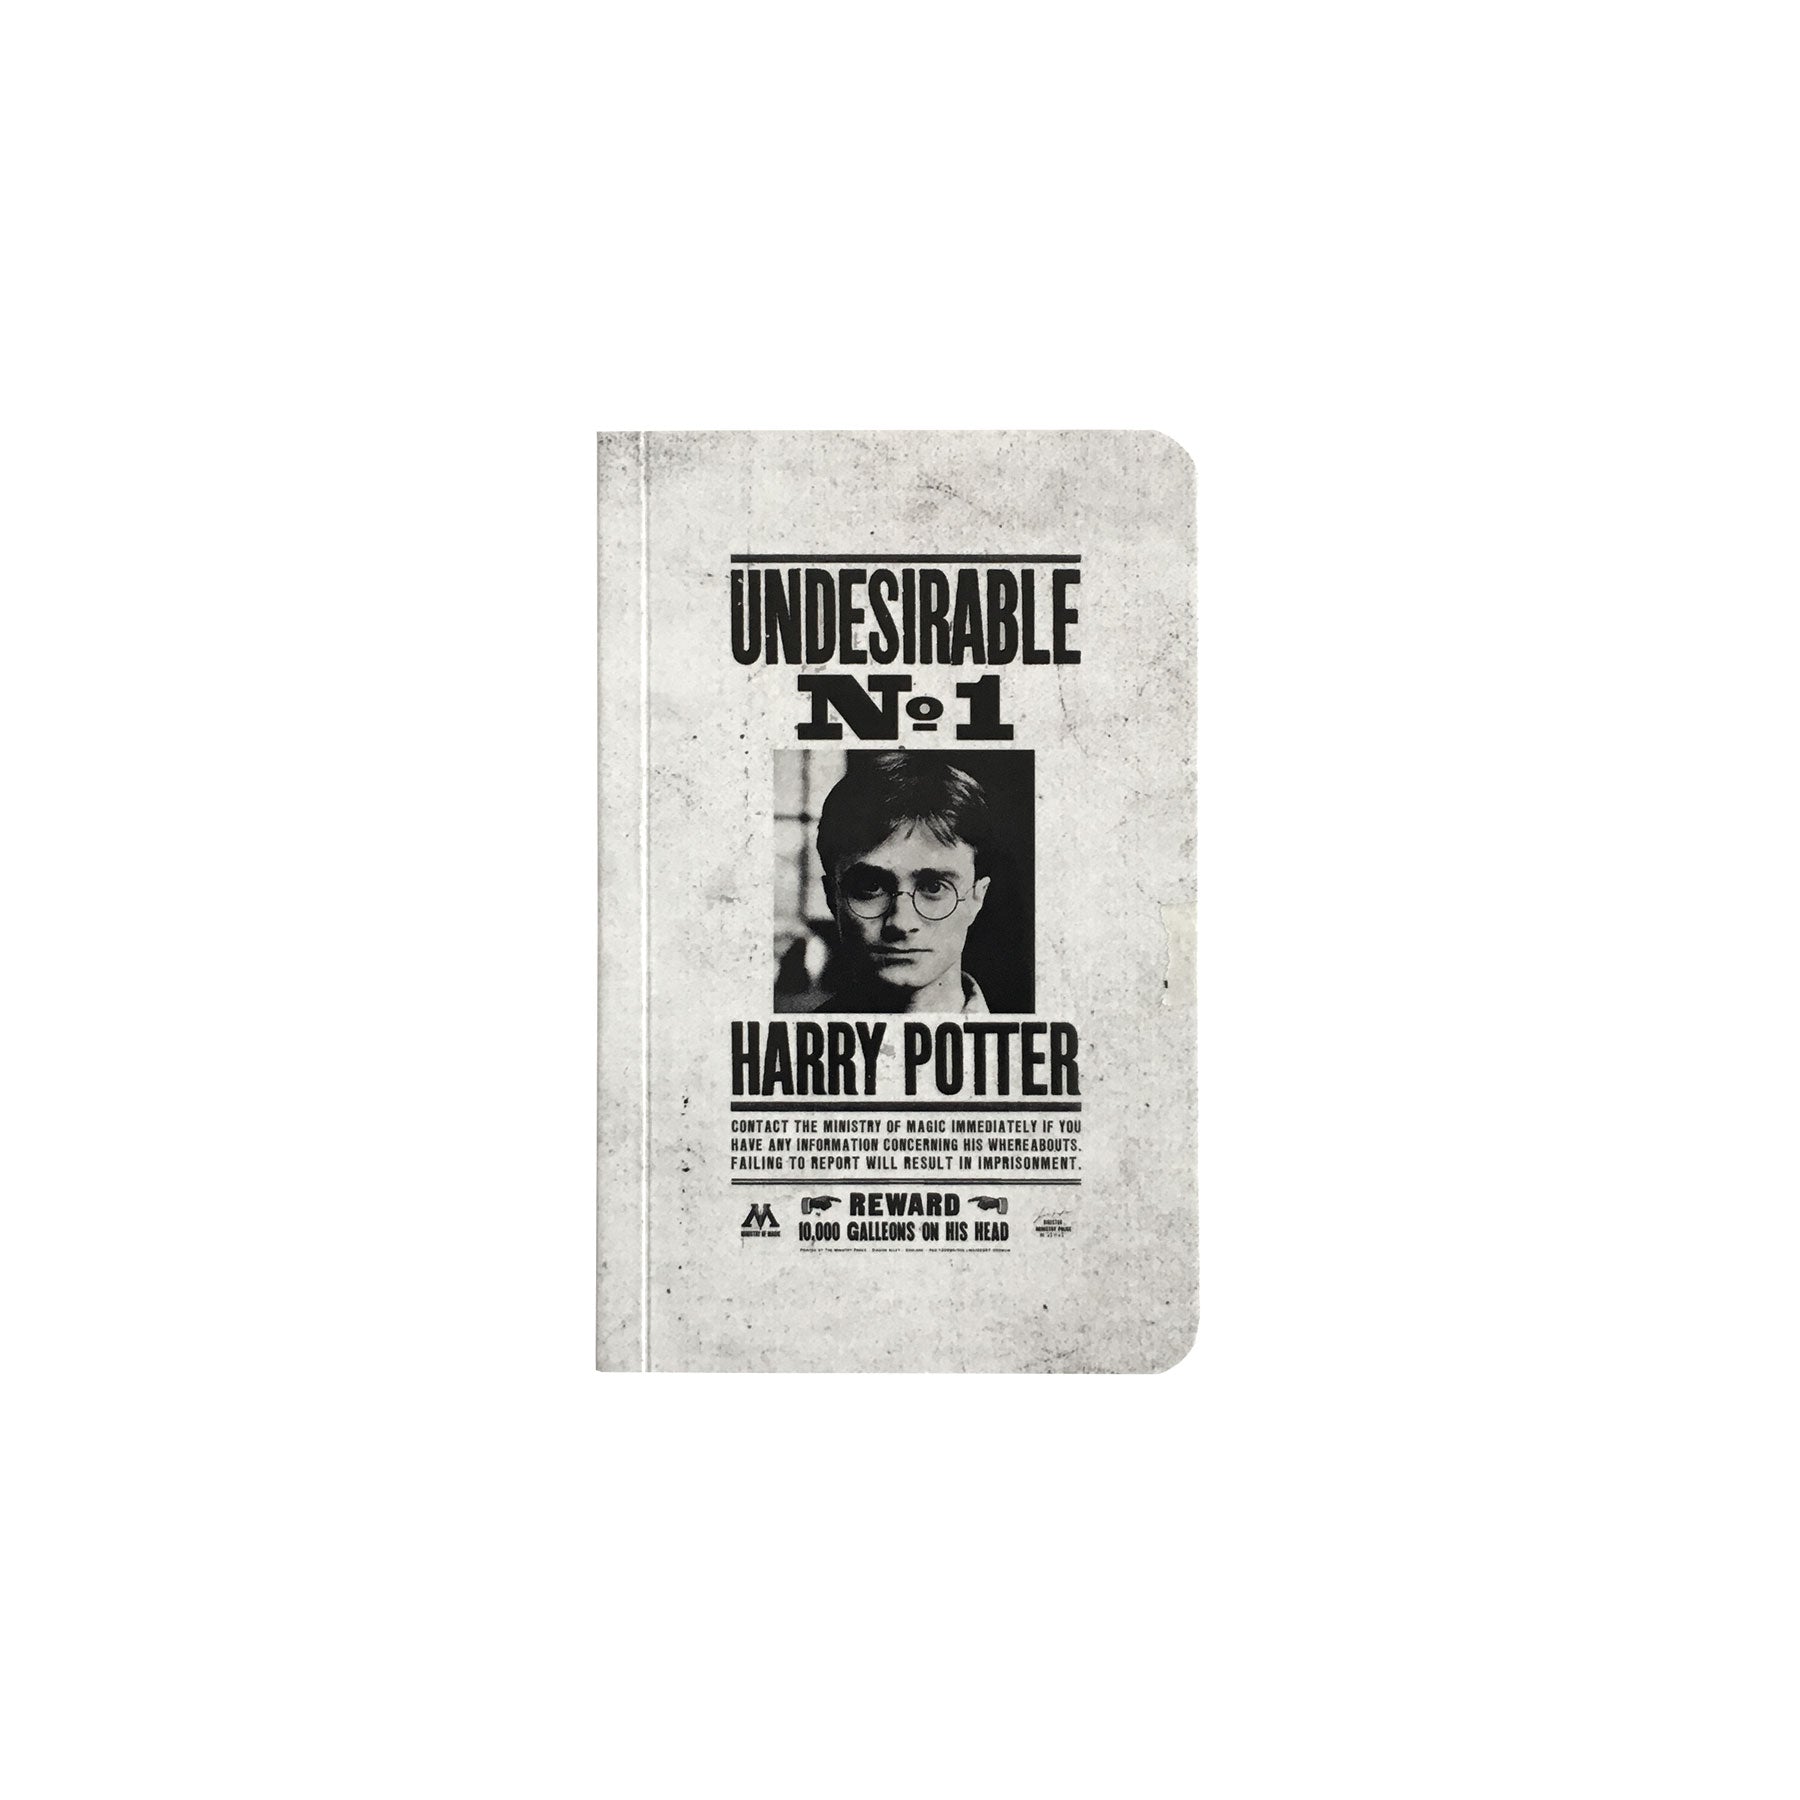 Wanted Posters Pocket Notebook Collection, Set of 3